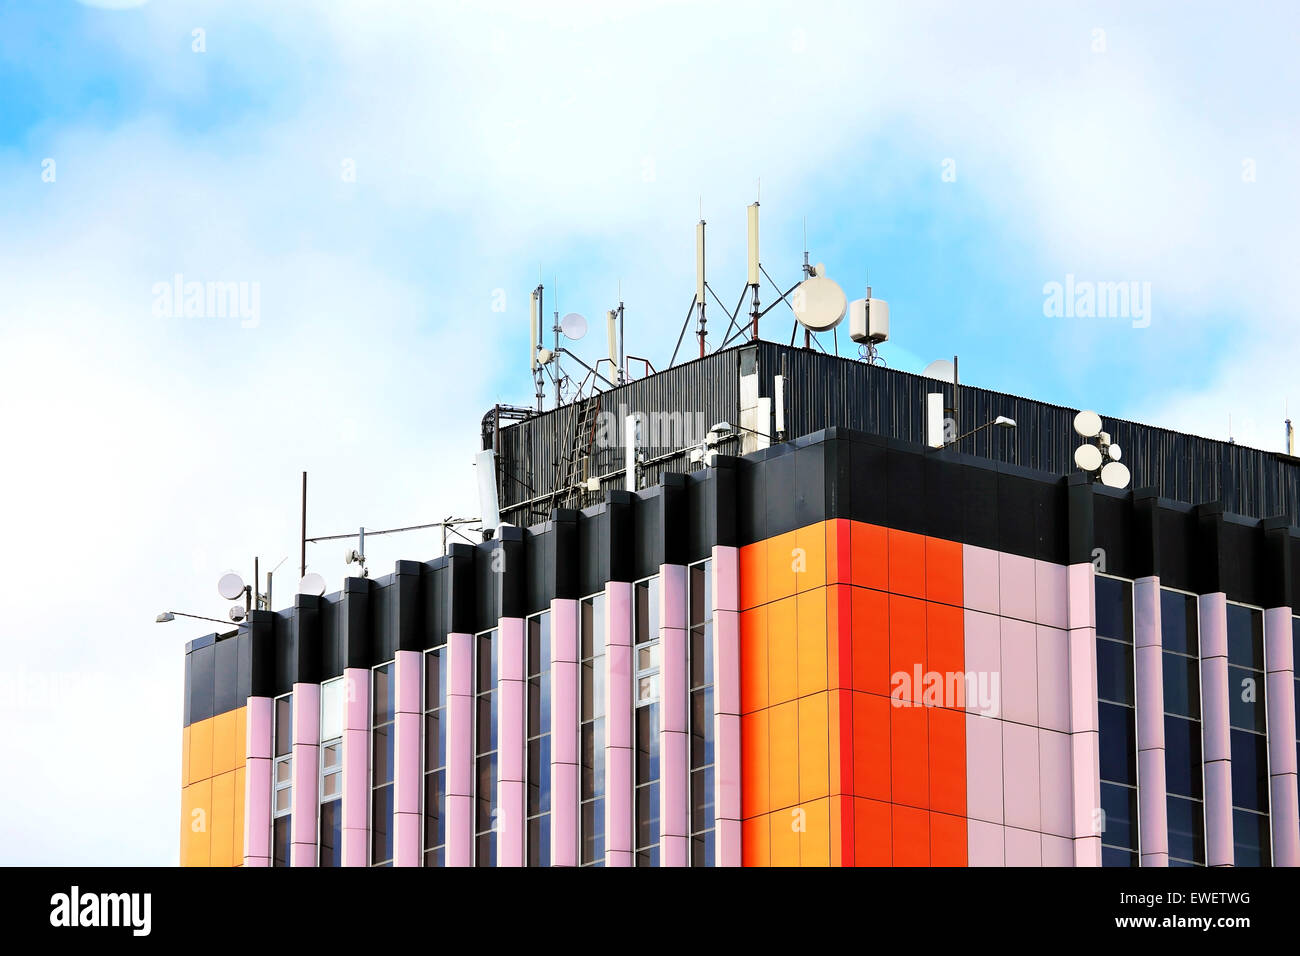 Ñellular communication units with microwave radio antenna equipment on the roof of an industrial building Stock Photo